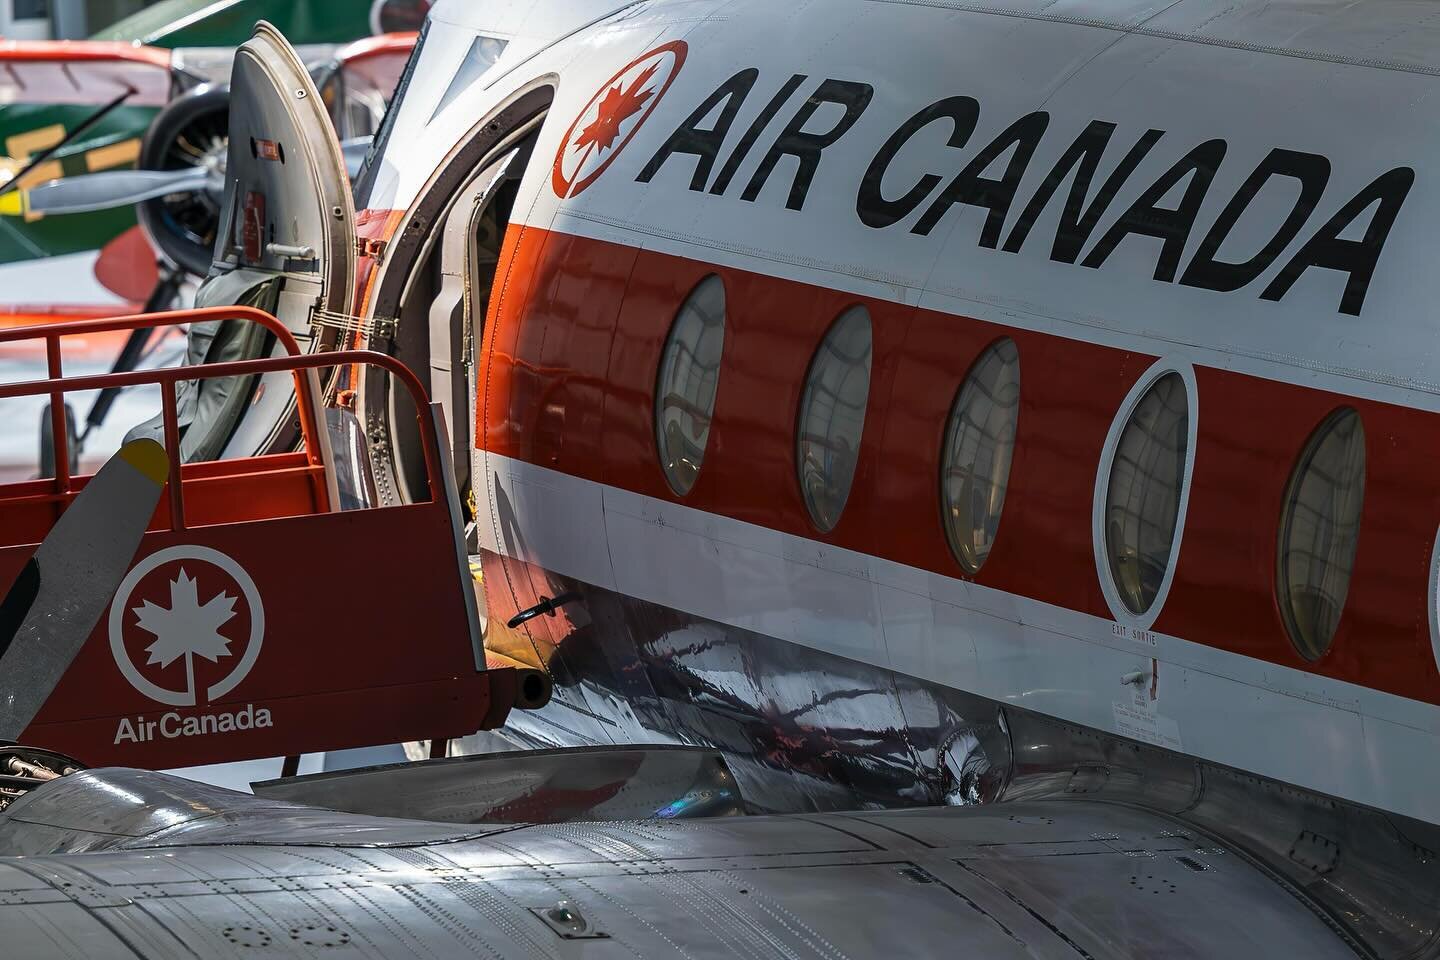 Captured the essence of aviation history last night at the Royal Aviation Museum.

 📷✈️ The Viscount Air Canada plane took center stage, revealing its timeless beauty from unique angles and vibrant colors. Immersed in the art of preserving history t